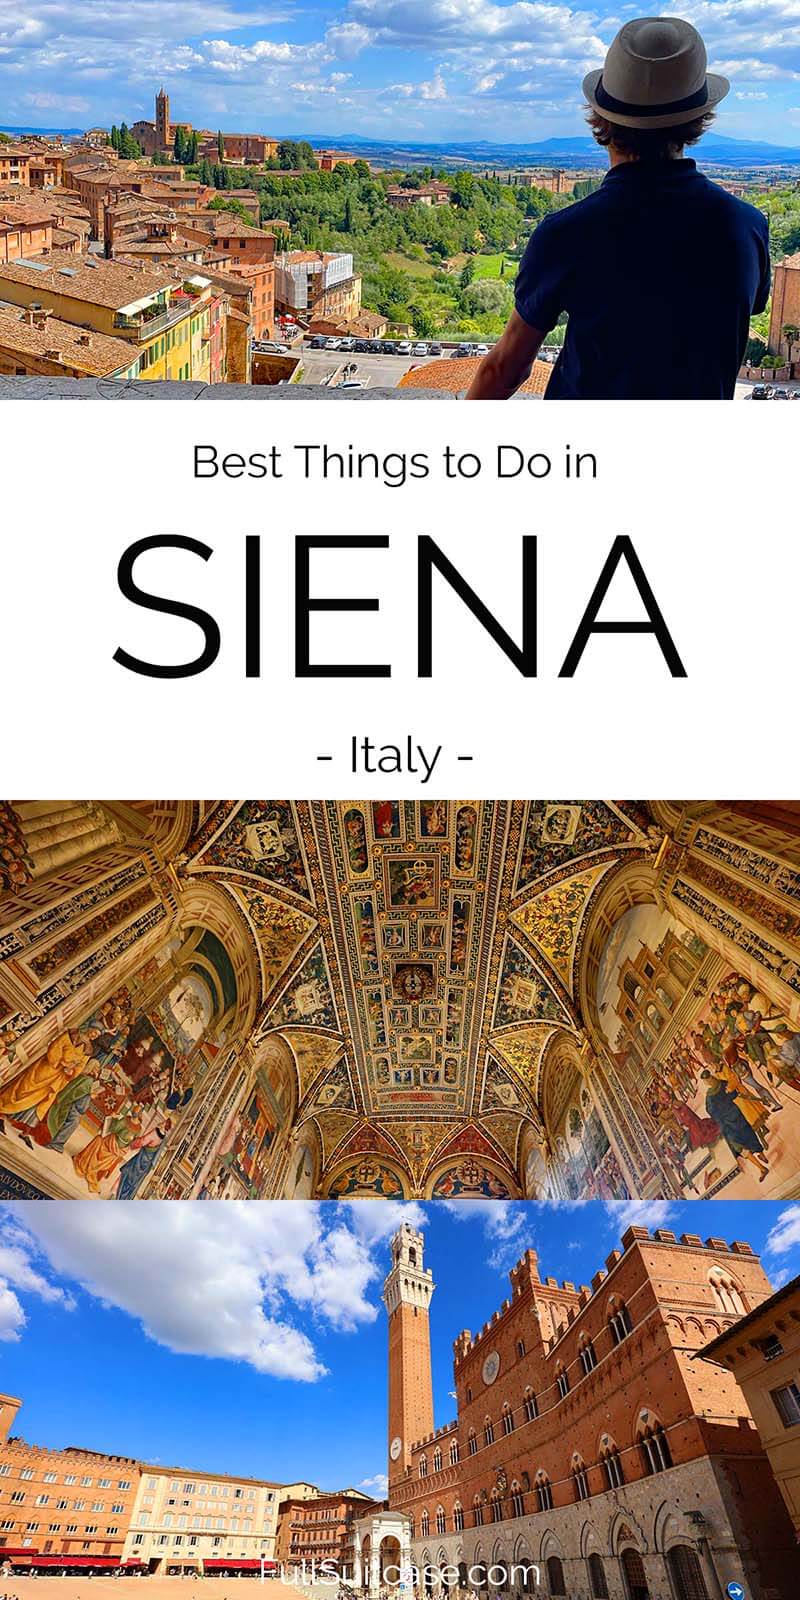 Top sights and things to do in Siena Italy